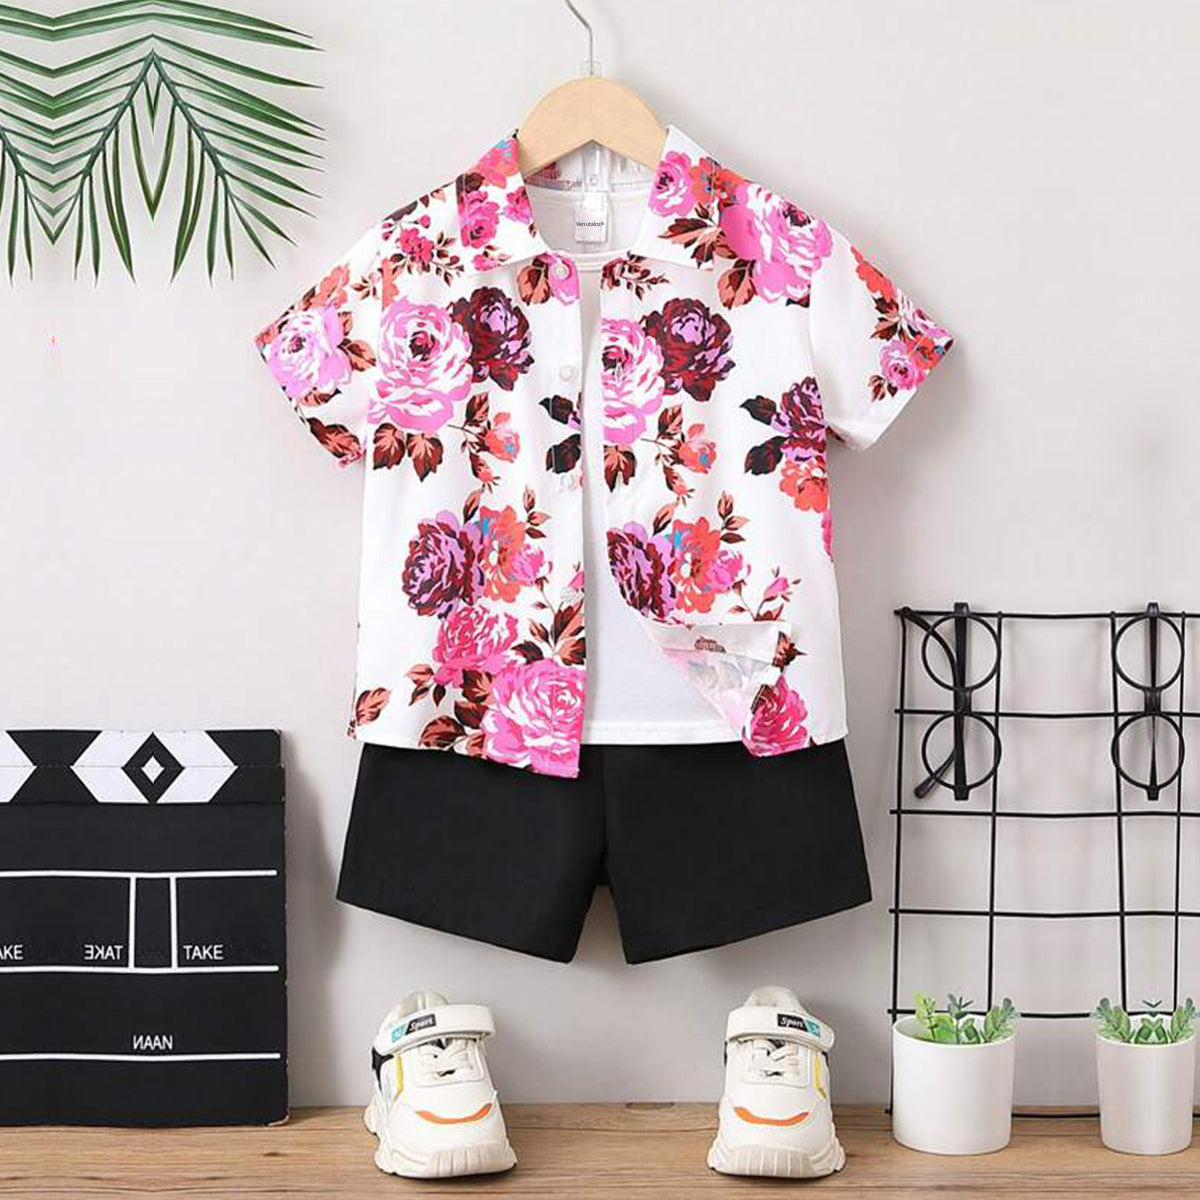 Venutaloza Baby Set Florals & Sunshine Plaid Turn Down Collar (Combo Pack Of 2) Shirt & Shorts Without tee Two Piece Set For Boy & Girls.